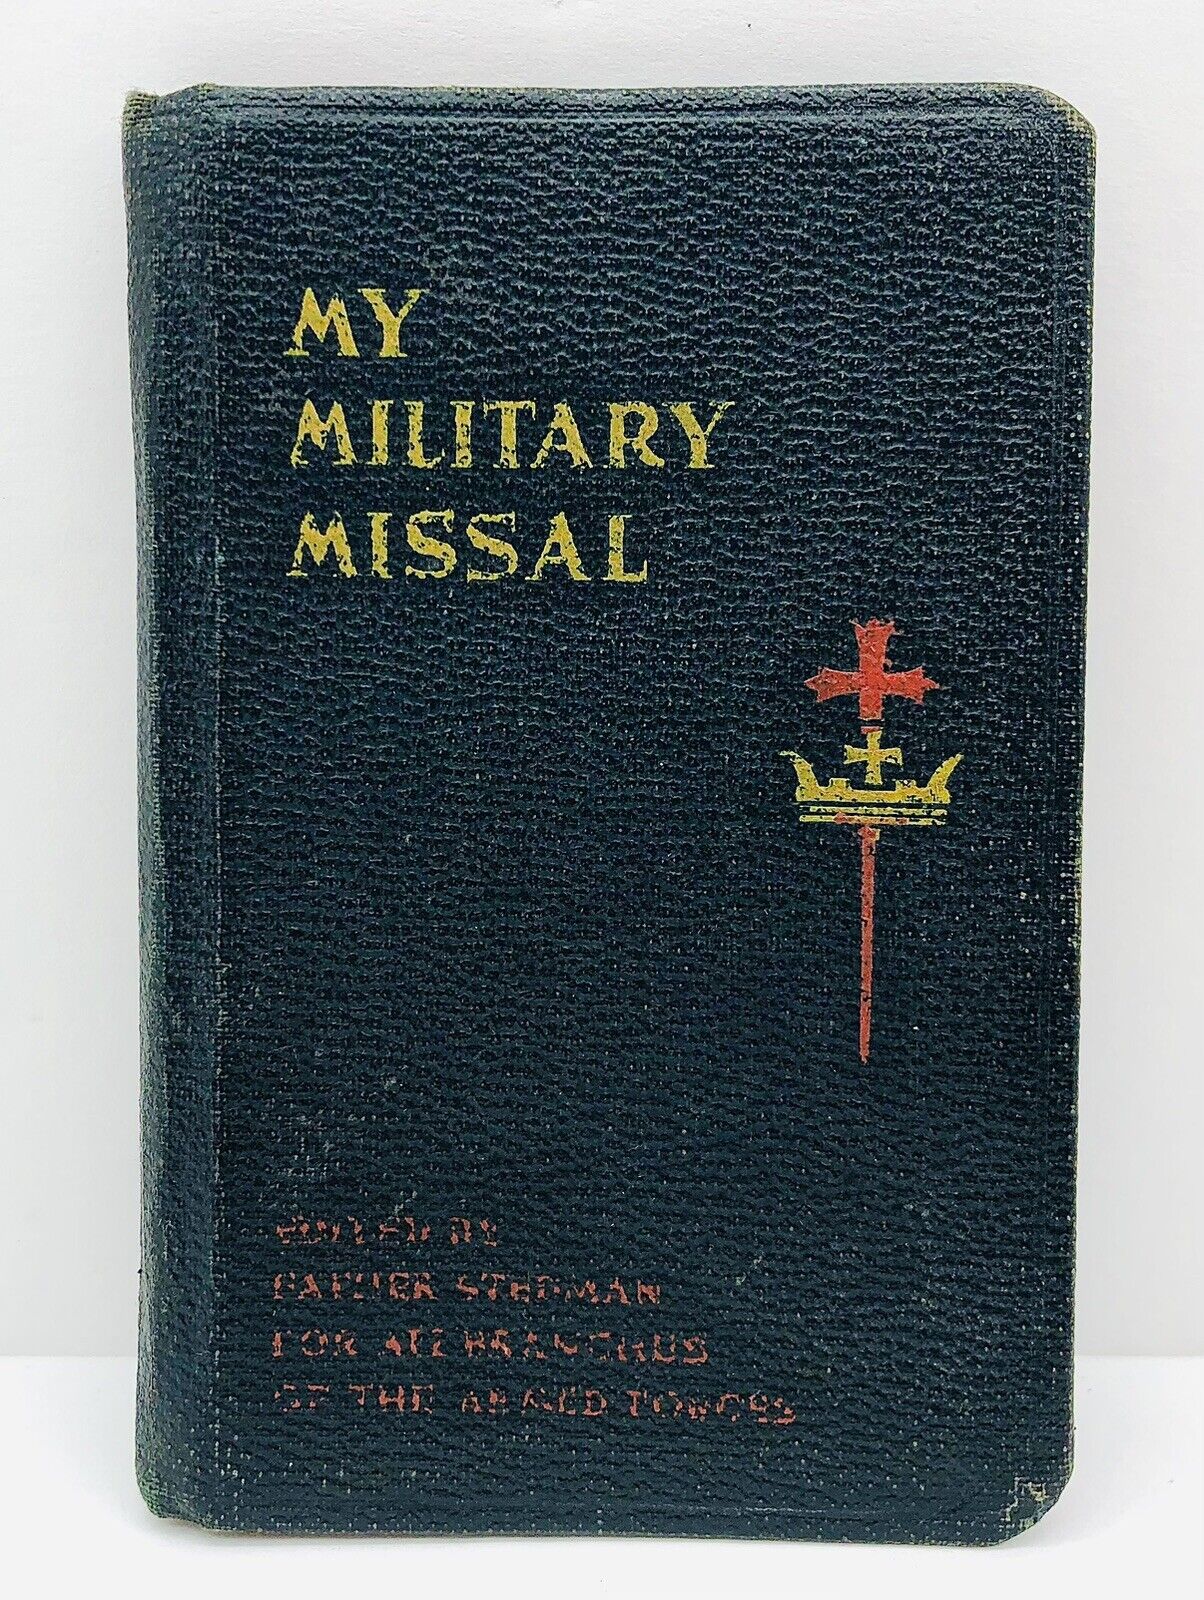 WW2 My Military Missal 1943 Father Stedman Armed Forces Catholic Prayer Book